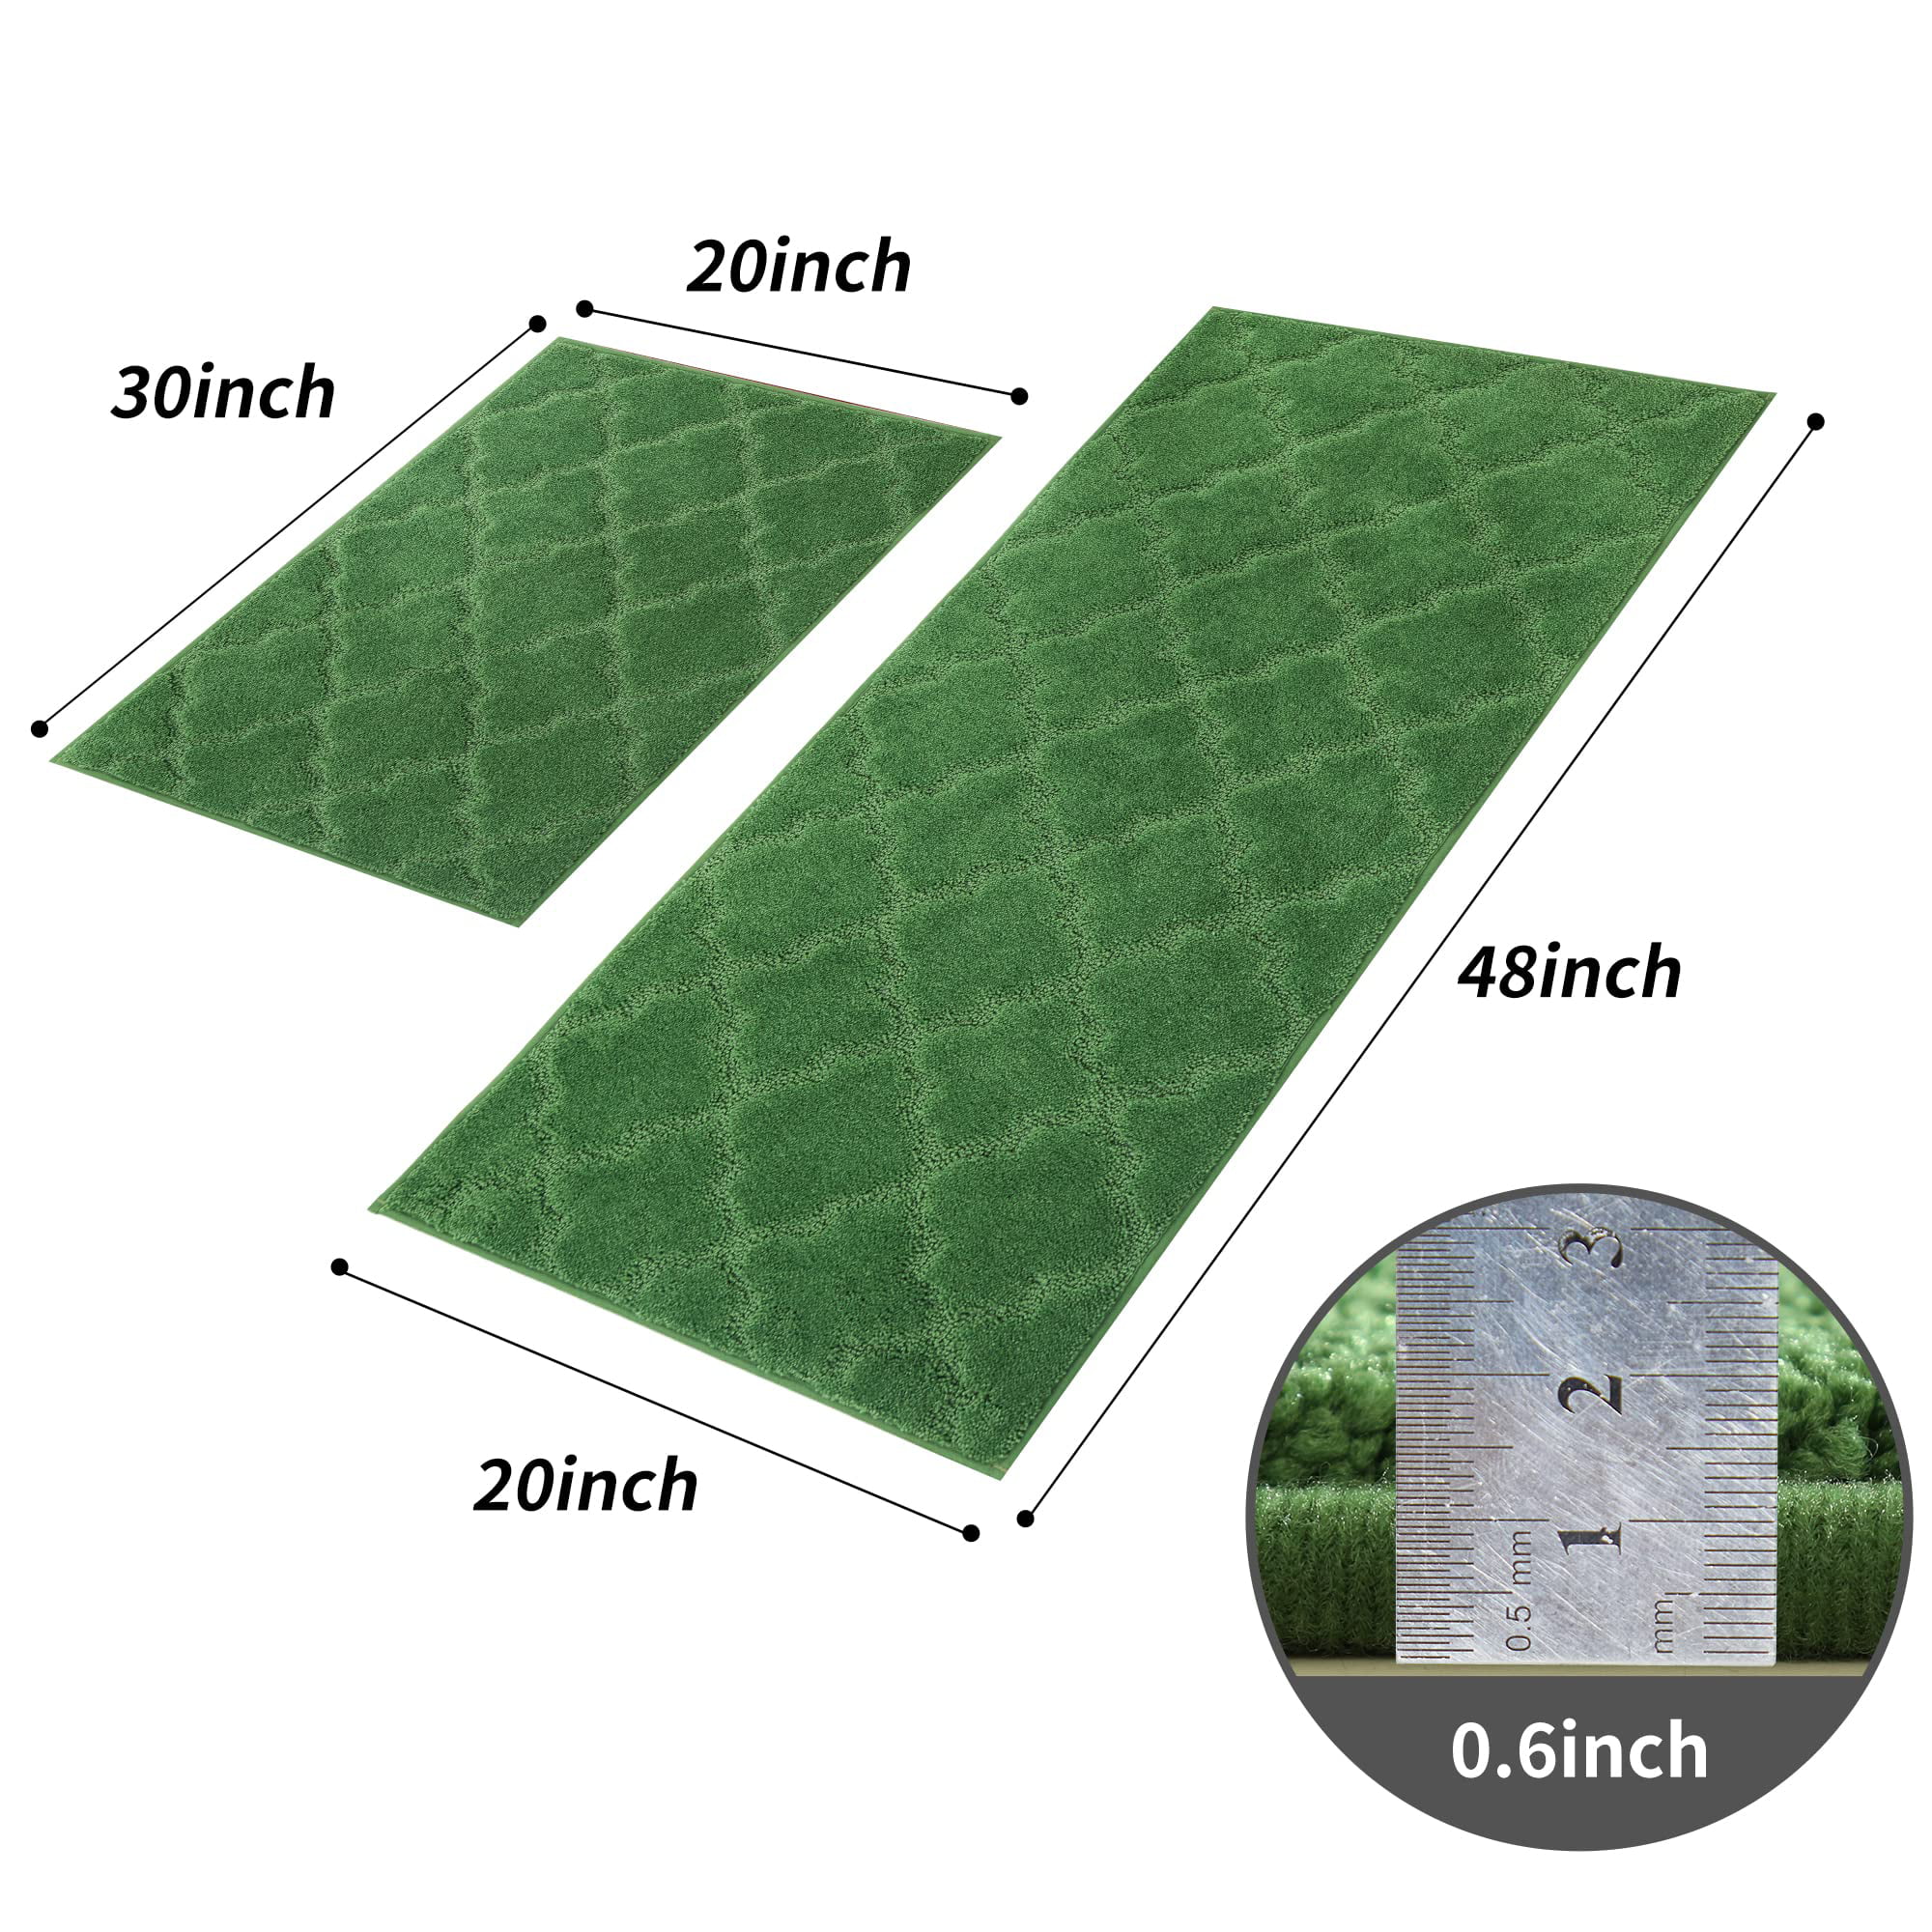 Soft Kitchen Floor Mats for in Front of Sink Super Absorbent Rugs 20x59  Non-Skid Kitchen Standing Mat Washable,Polyester,Green